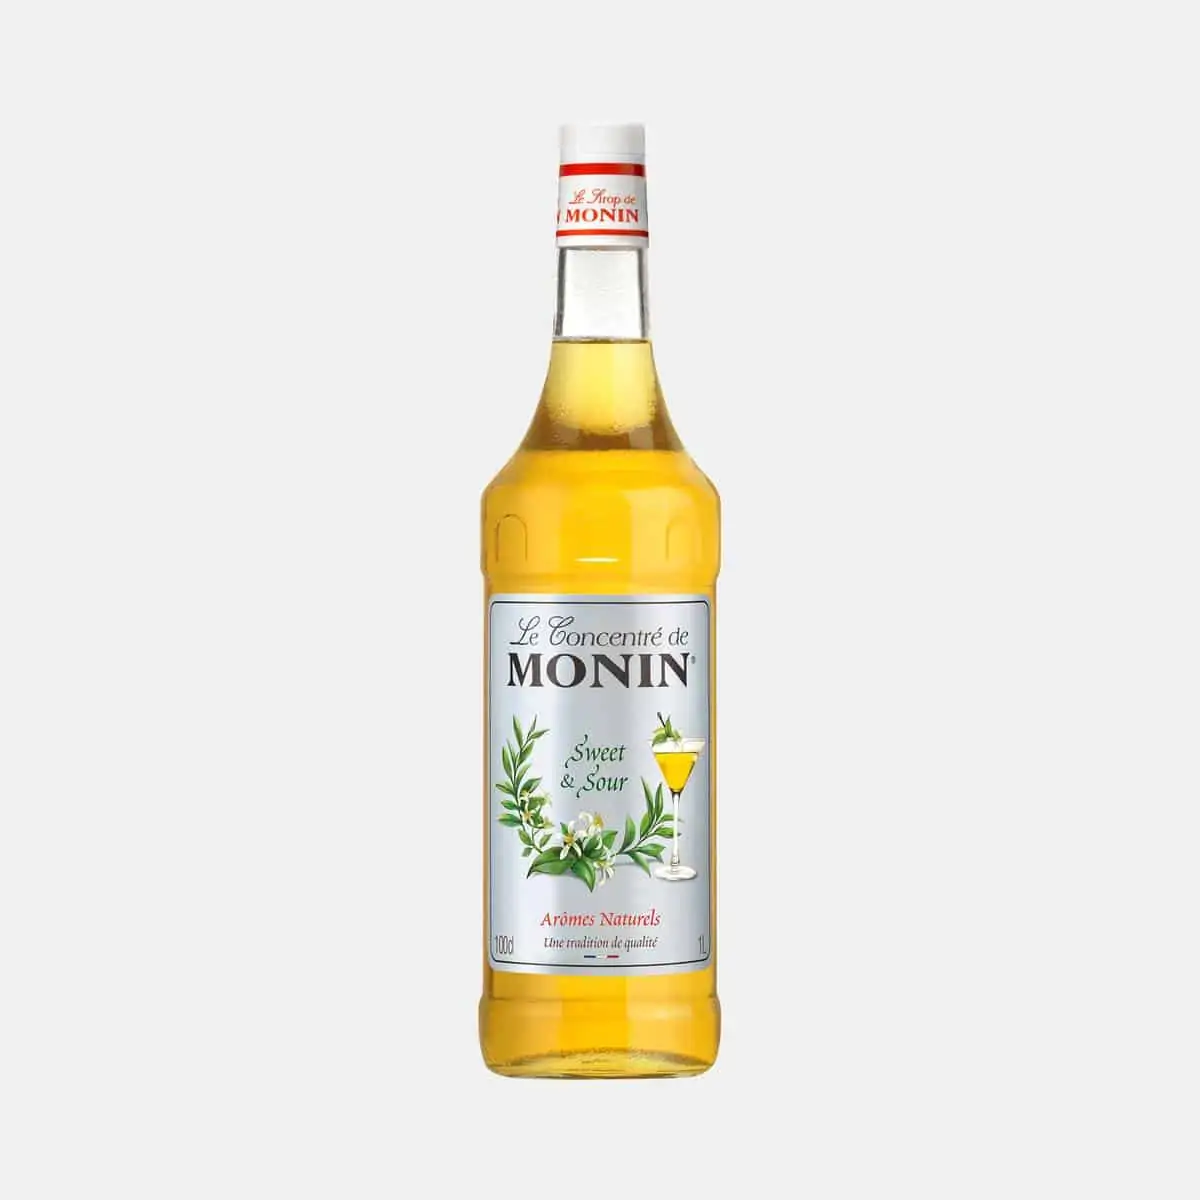 Monin Sweet and Sour Concentrate 1 Liter Glass Bottle